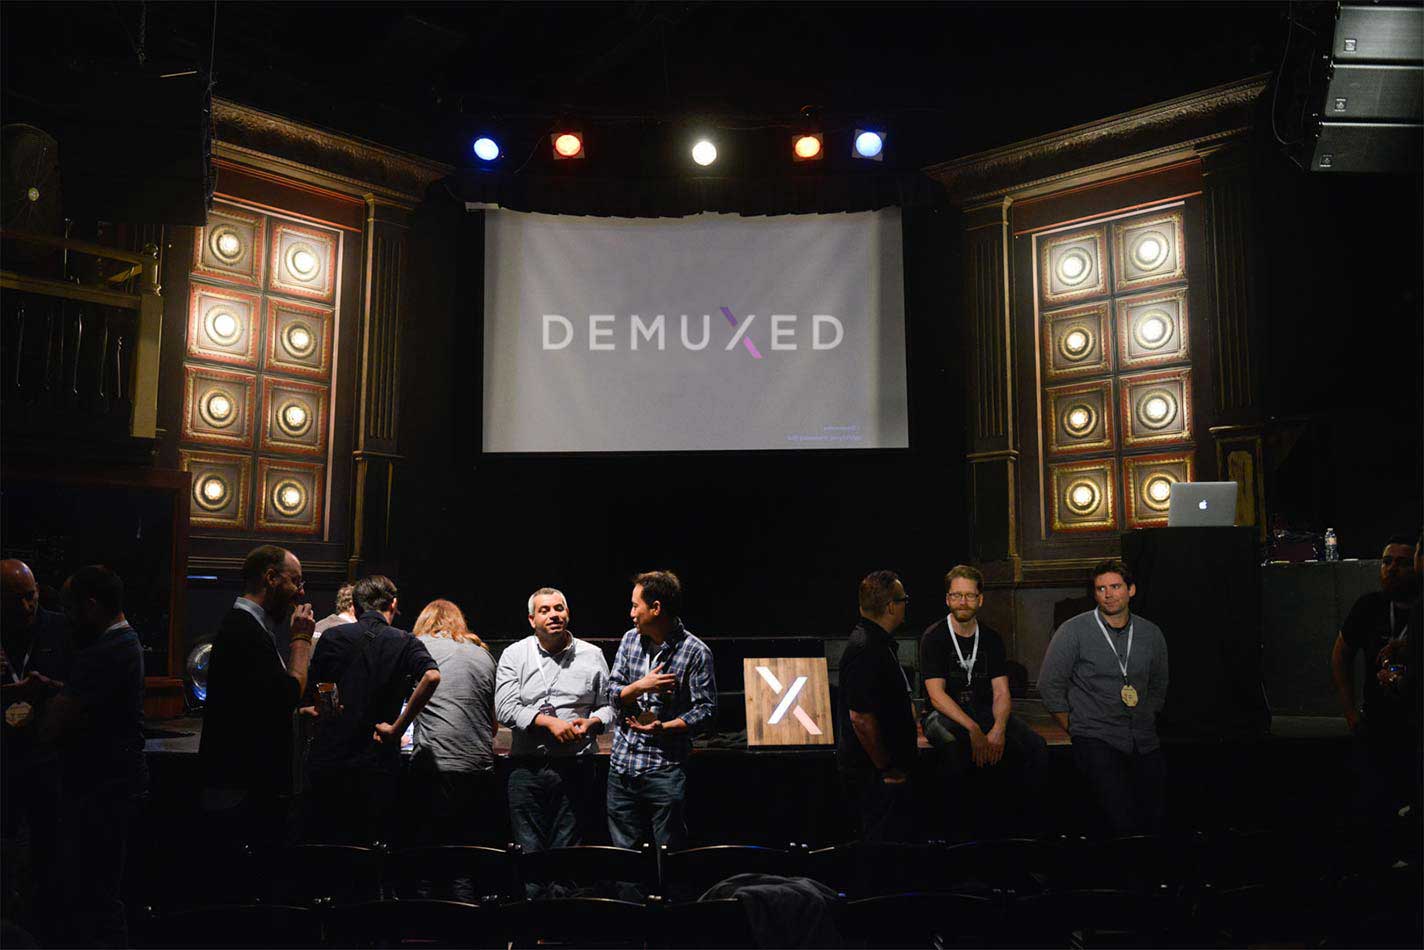 Demuxed conference